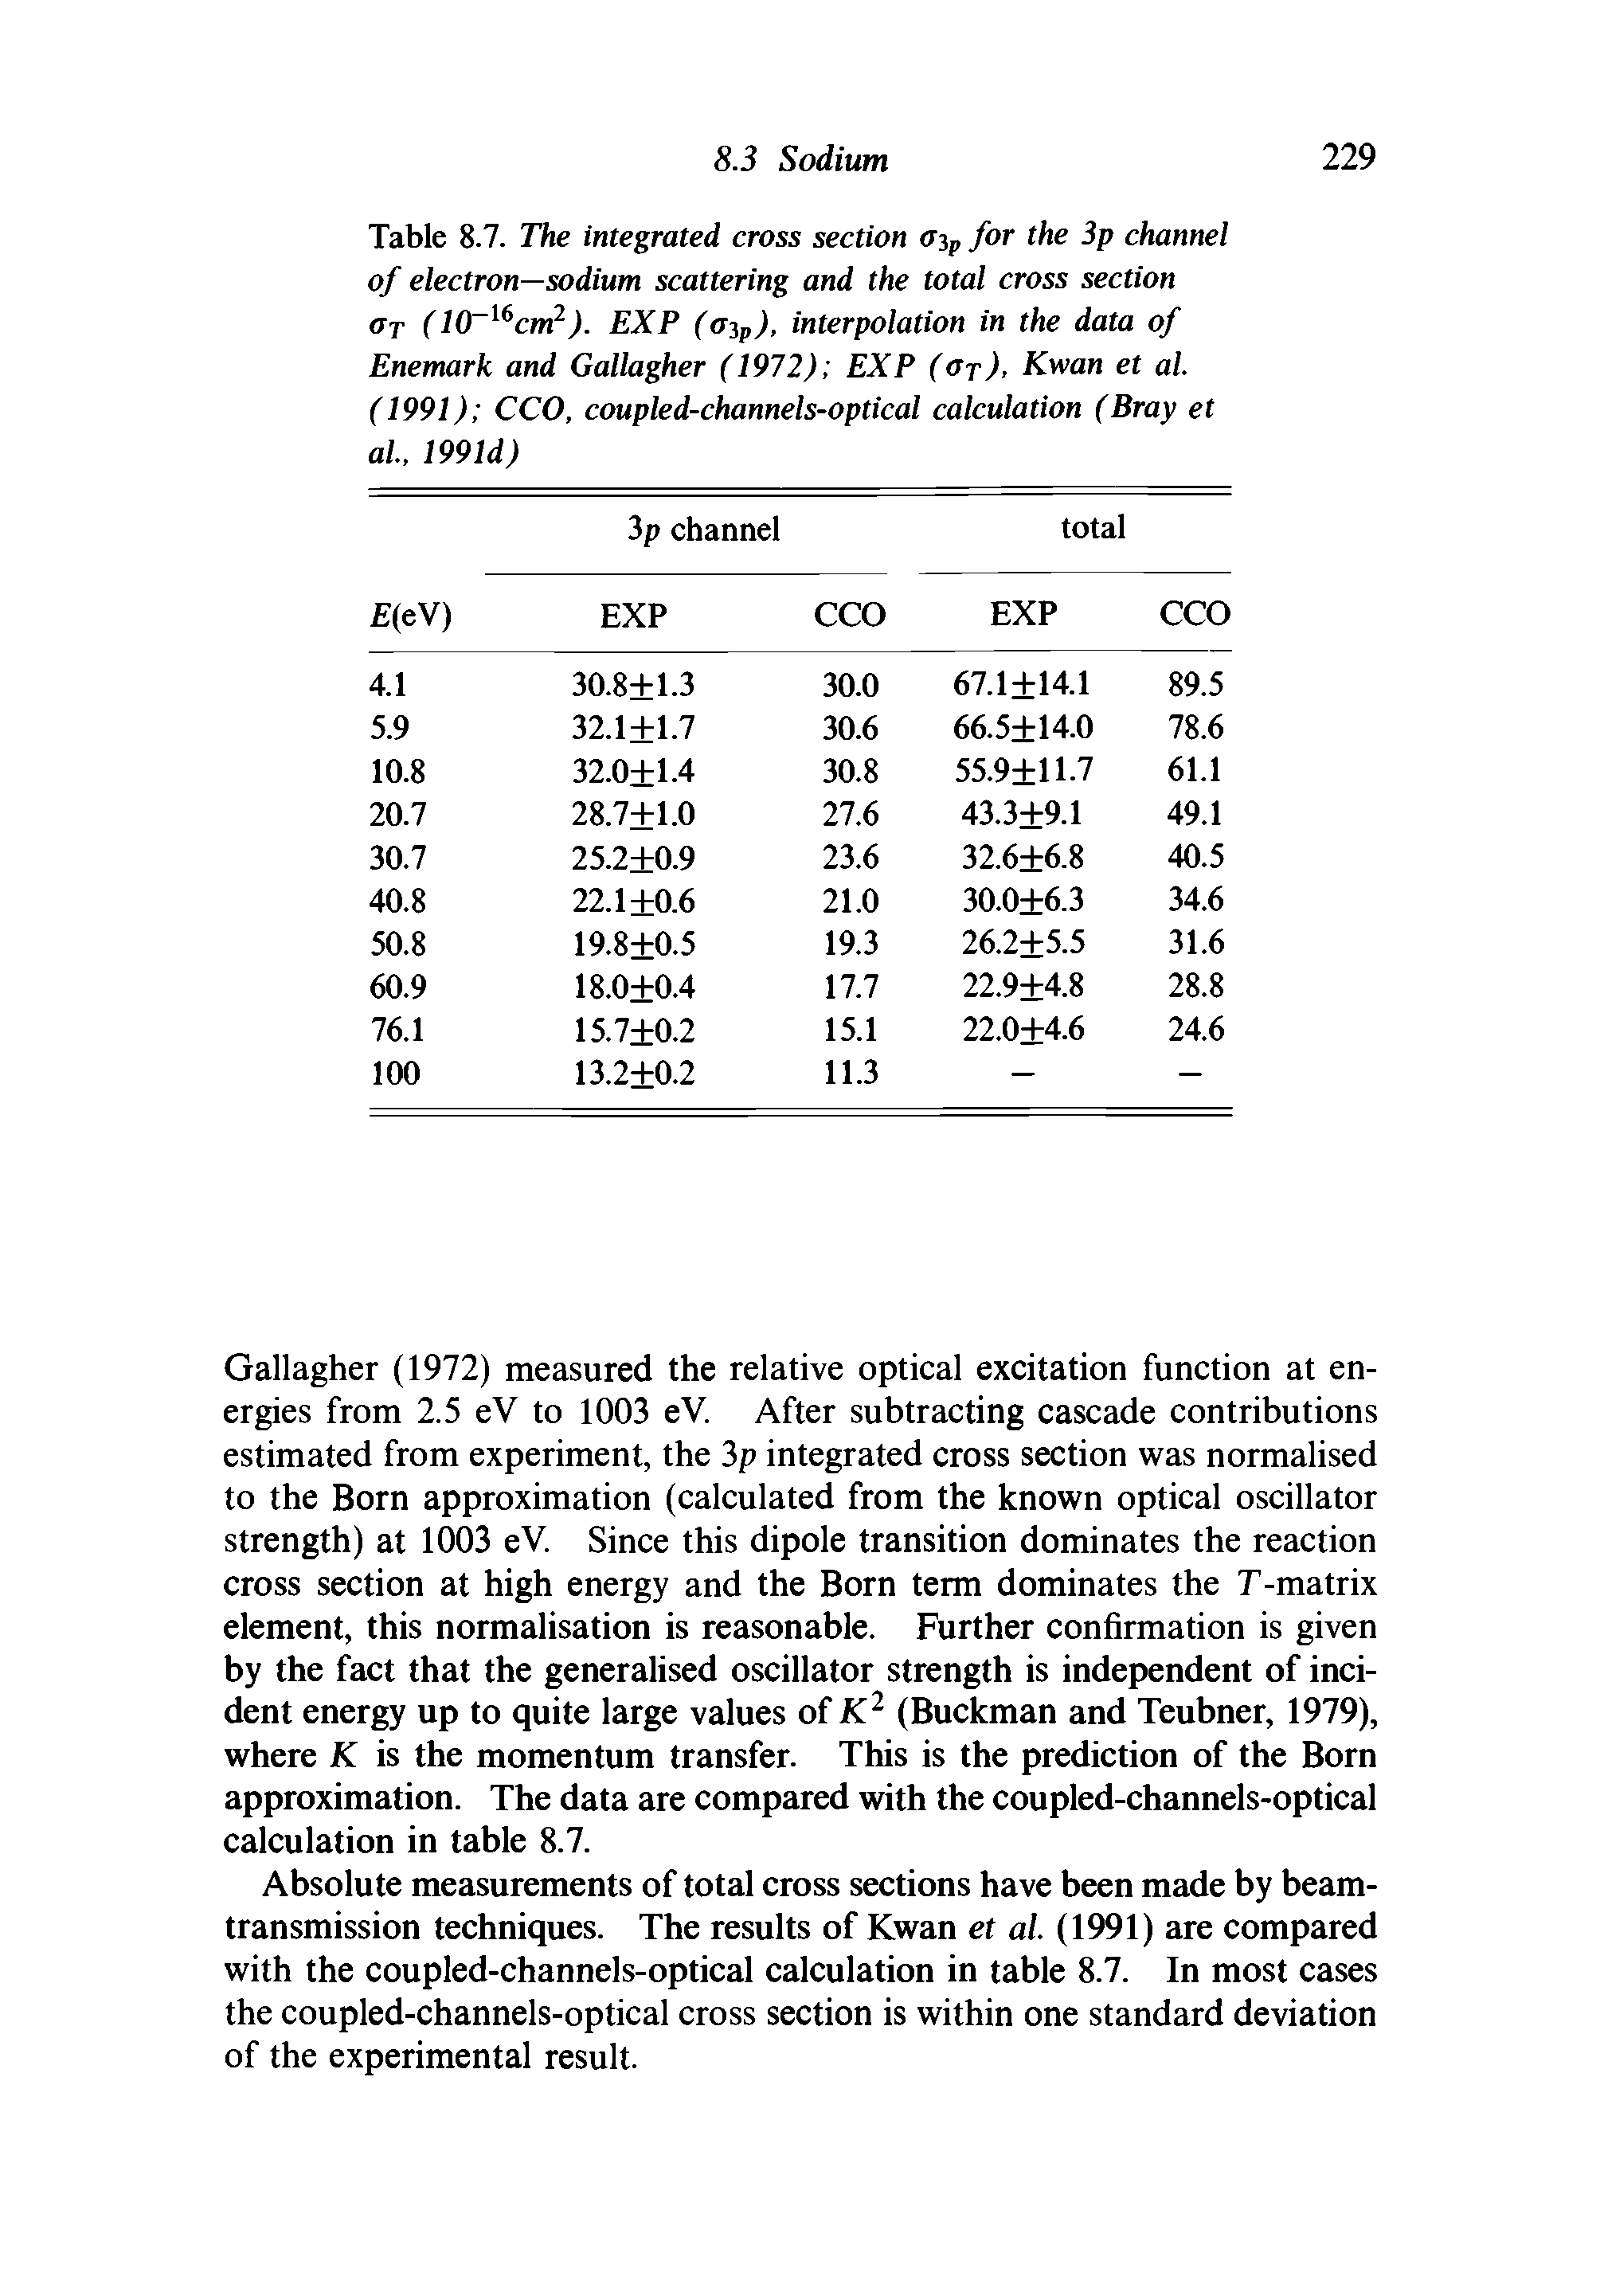 Table 8.7. The integrated cross section a p for the 3p channel of electron—sodium scattering and the total cross section ot (ICr cm ). EXP (a-ip), interpolation in the data of Enemark and Gallagher (1972) EXP (oj), Kwan et al. (1991) CCO, coupled-channels-optical calculation (Bray et al, 199 Id)...